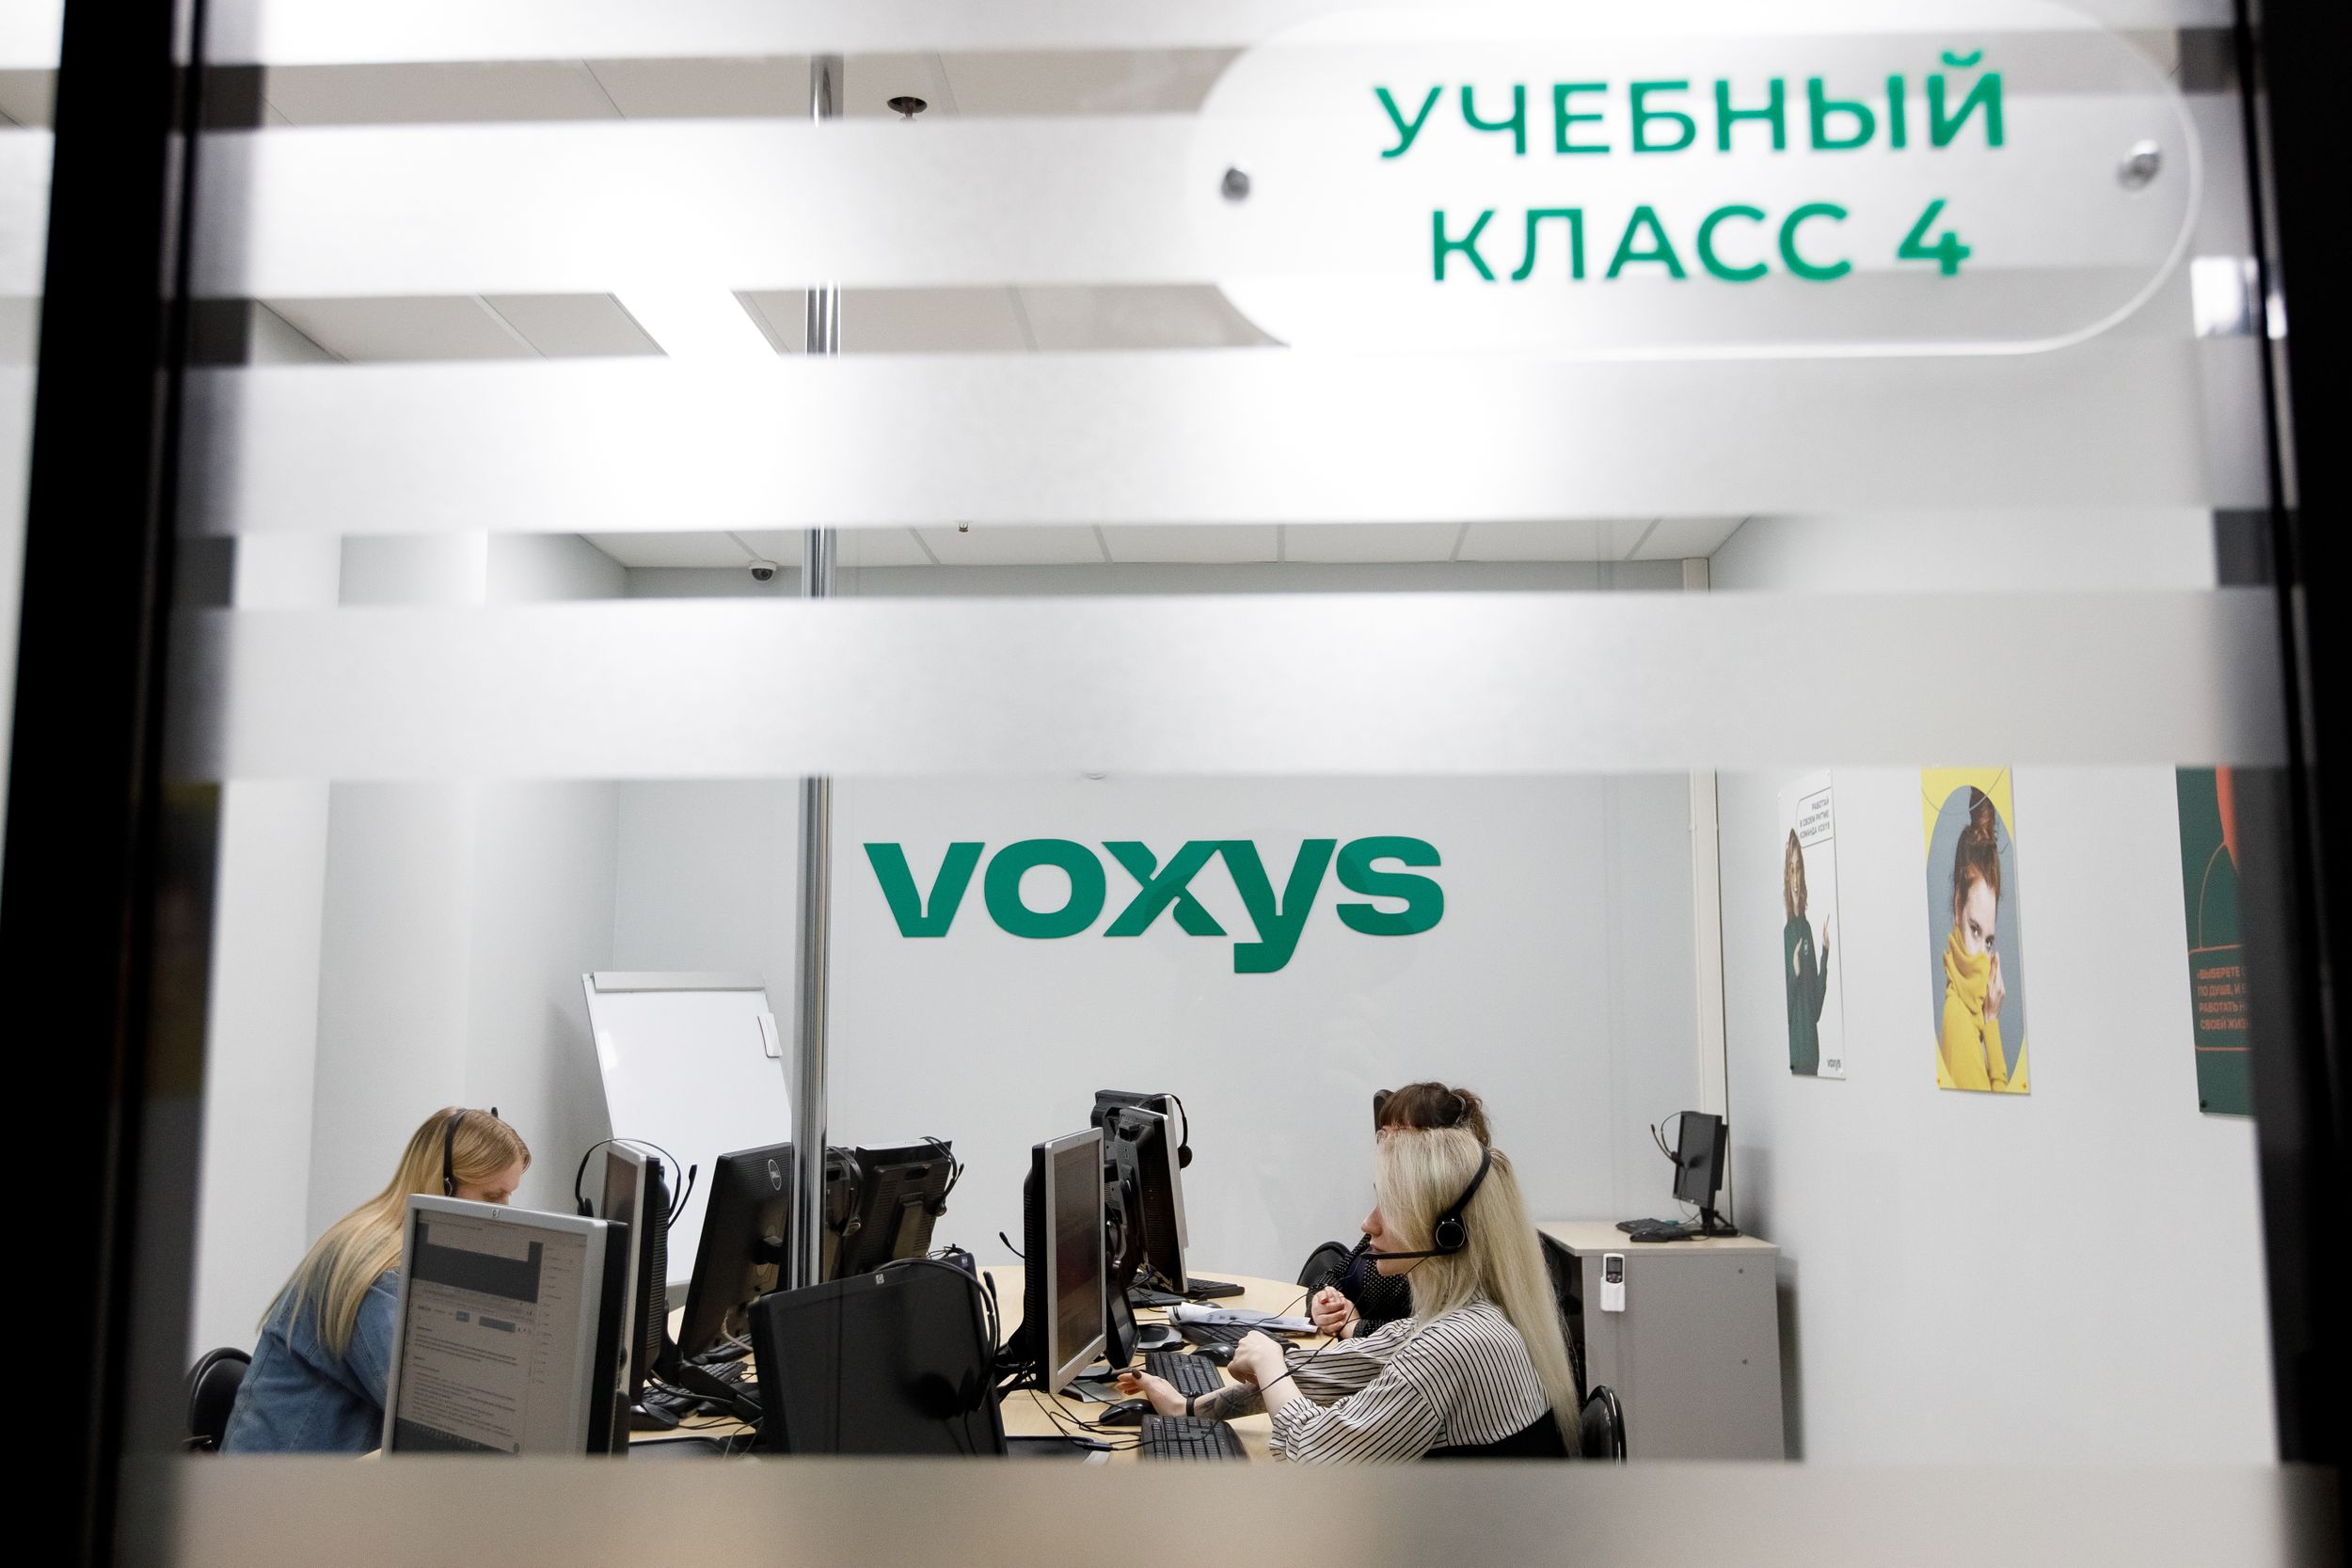 VOXYS opened a training center in Rostov-on-Don